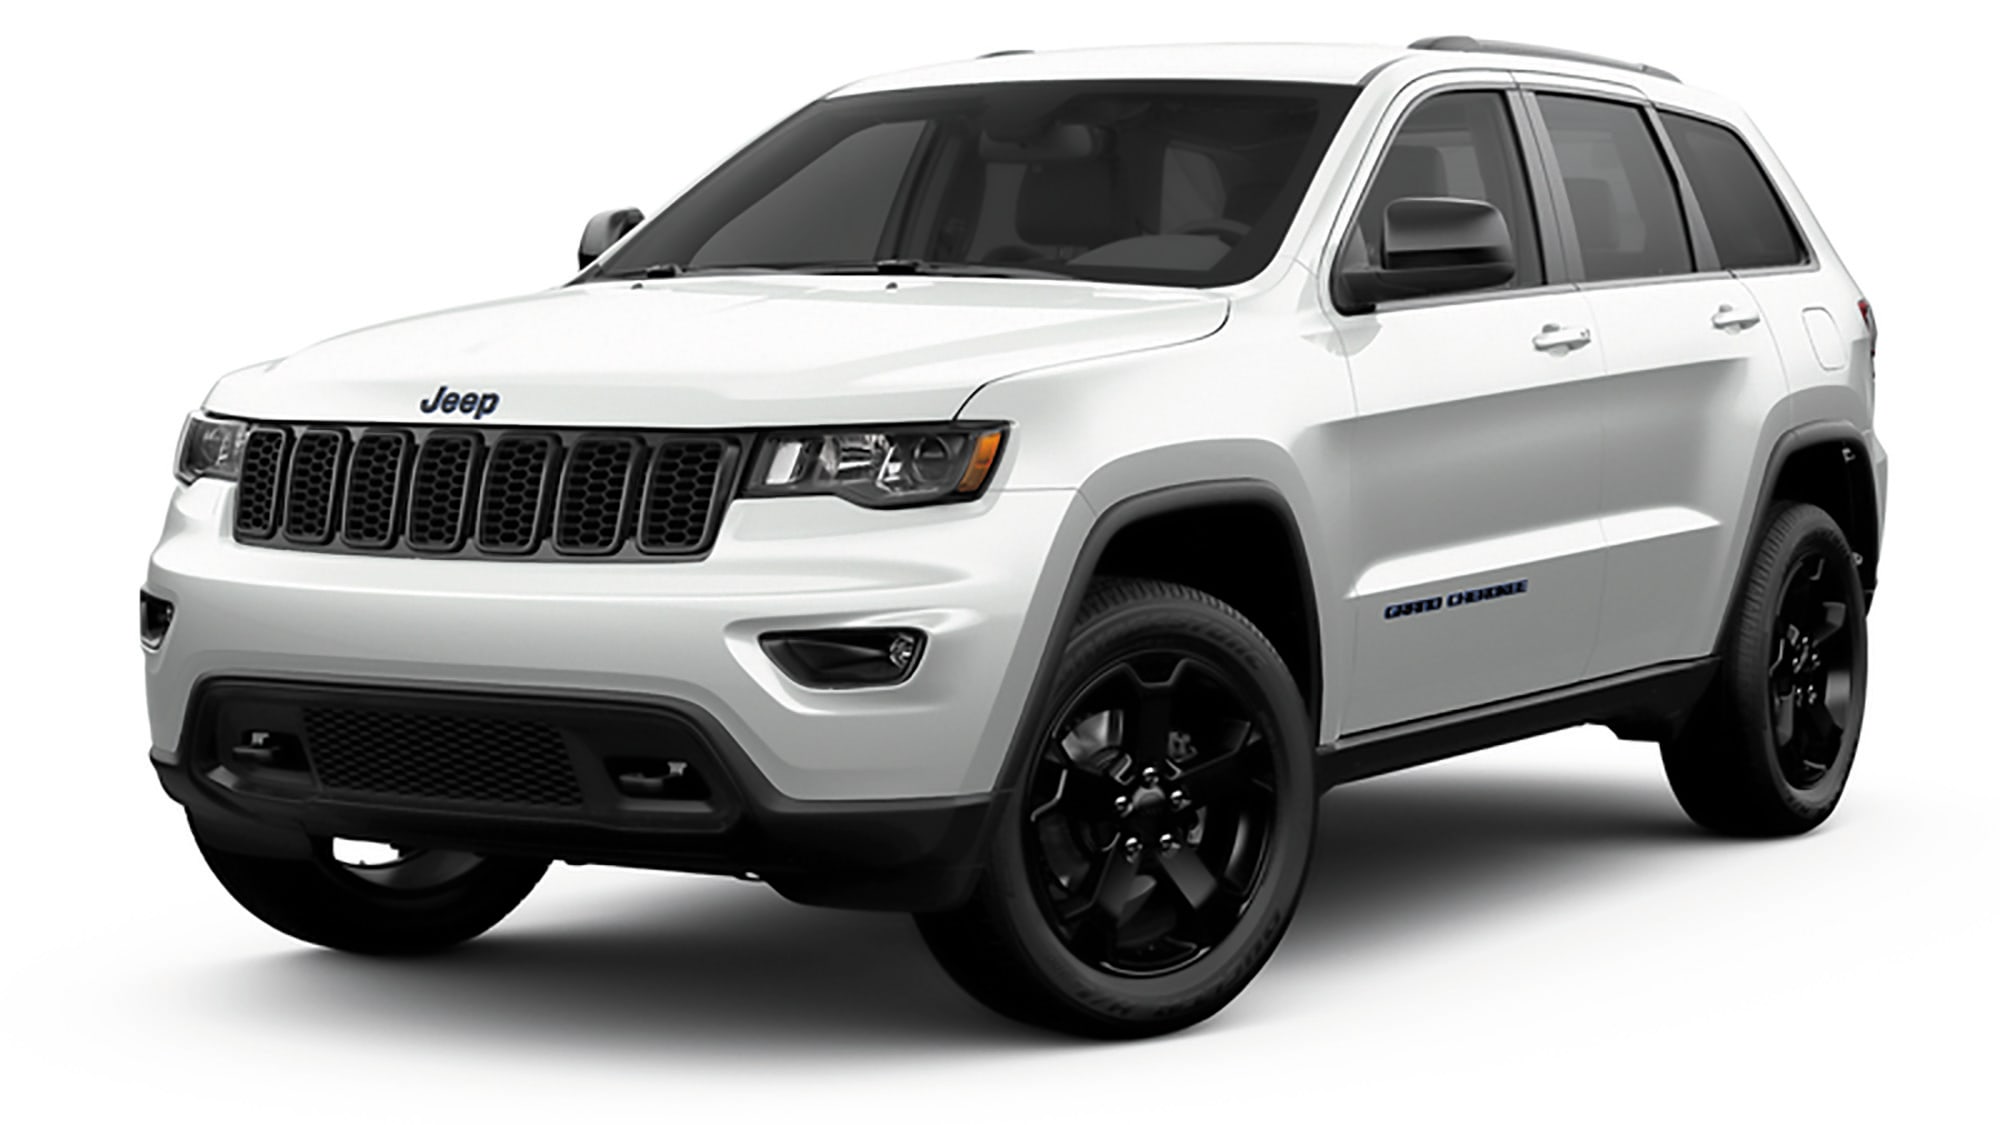 19 Jeep Grand Cherokee Upland On Sale From 61 450 Caradvice